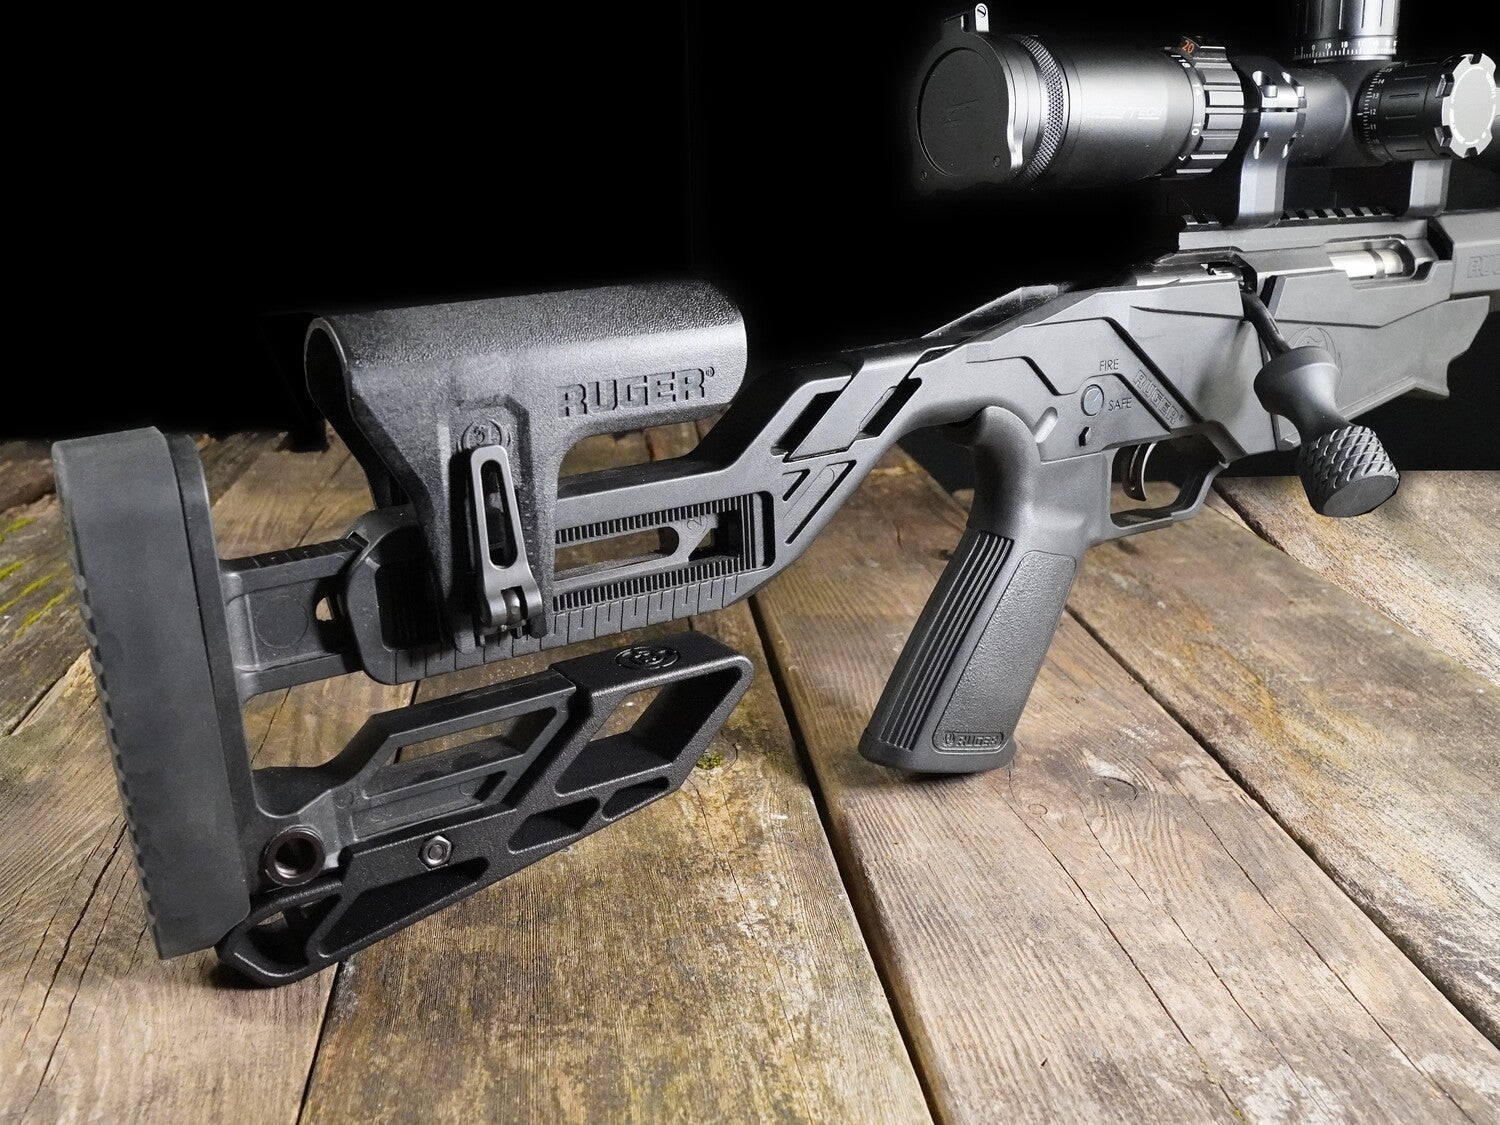 Catalyst Arms Introduces New Bag Rider for Ruger Precision Rimfire